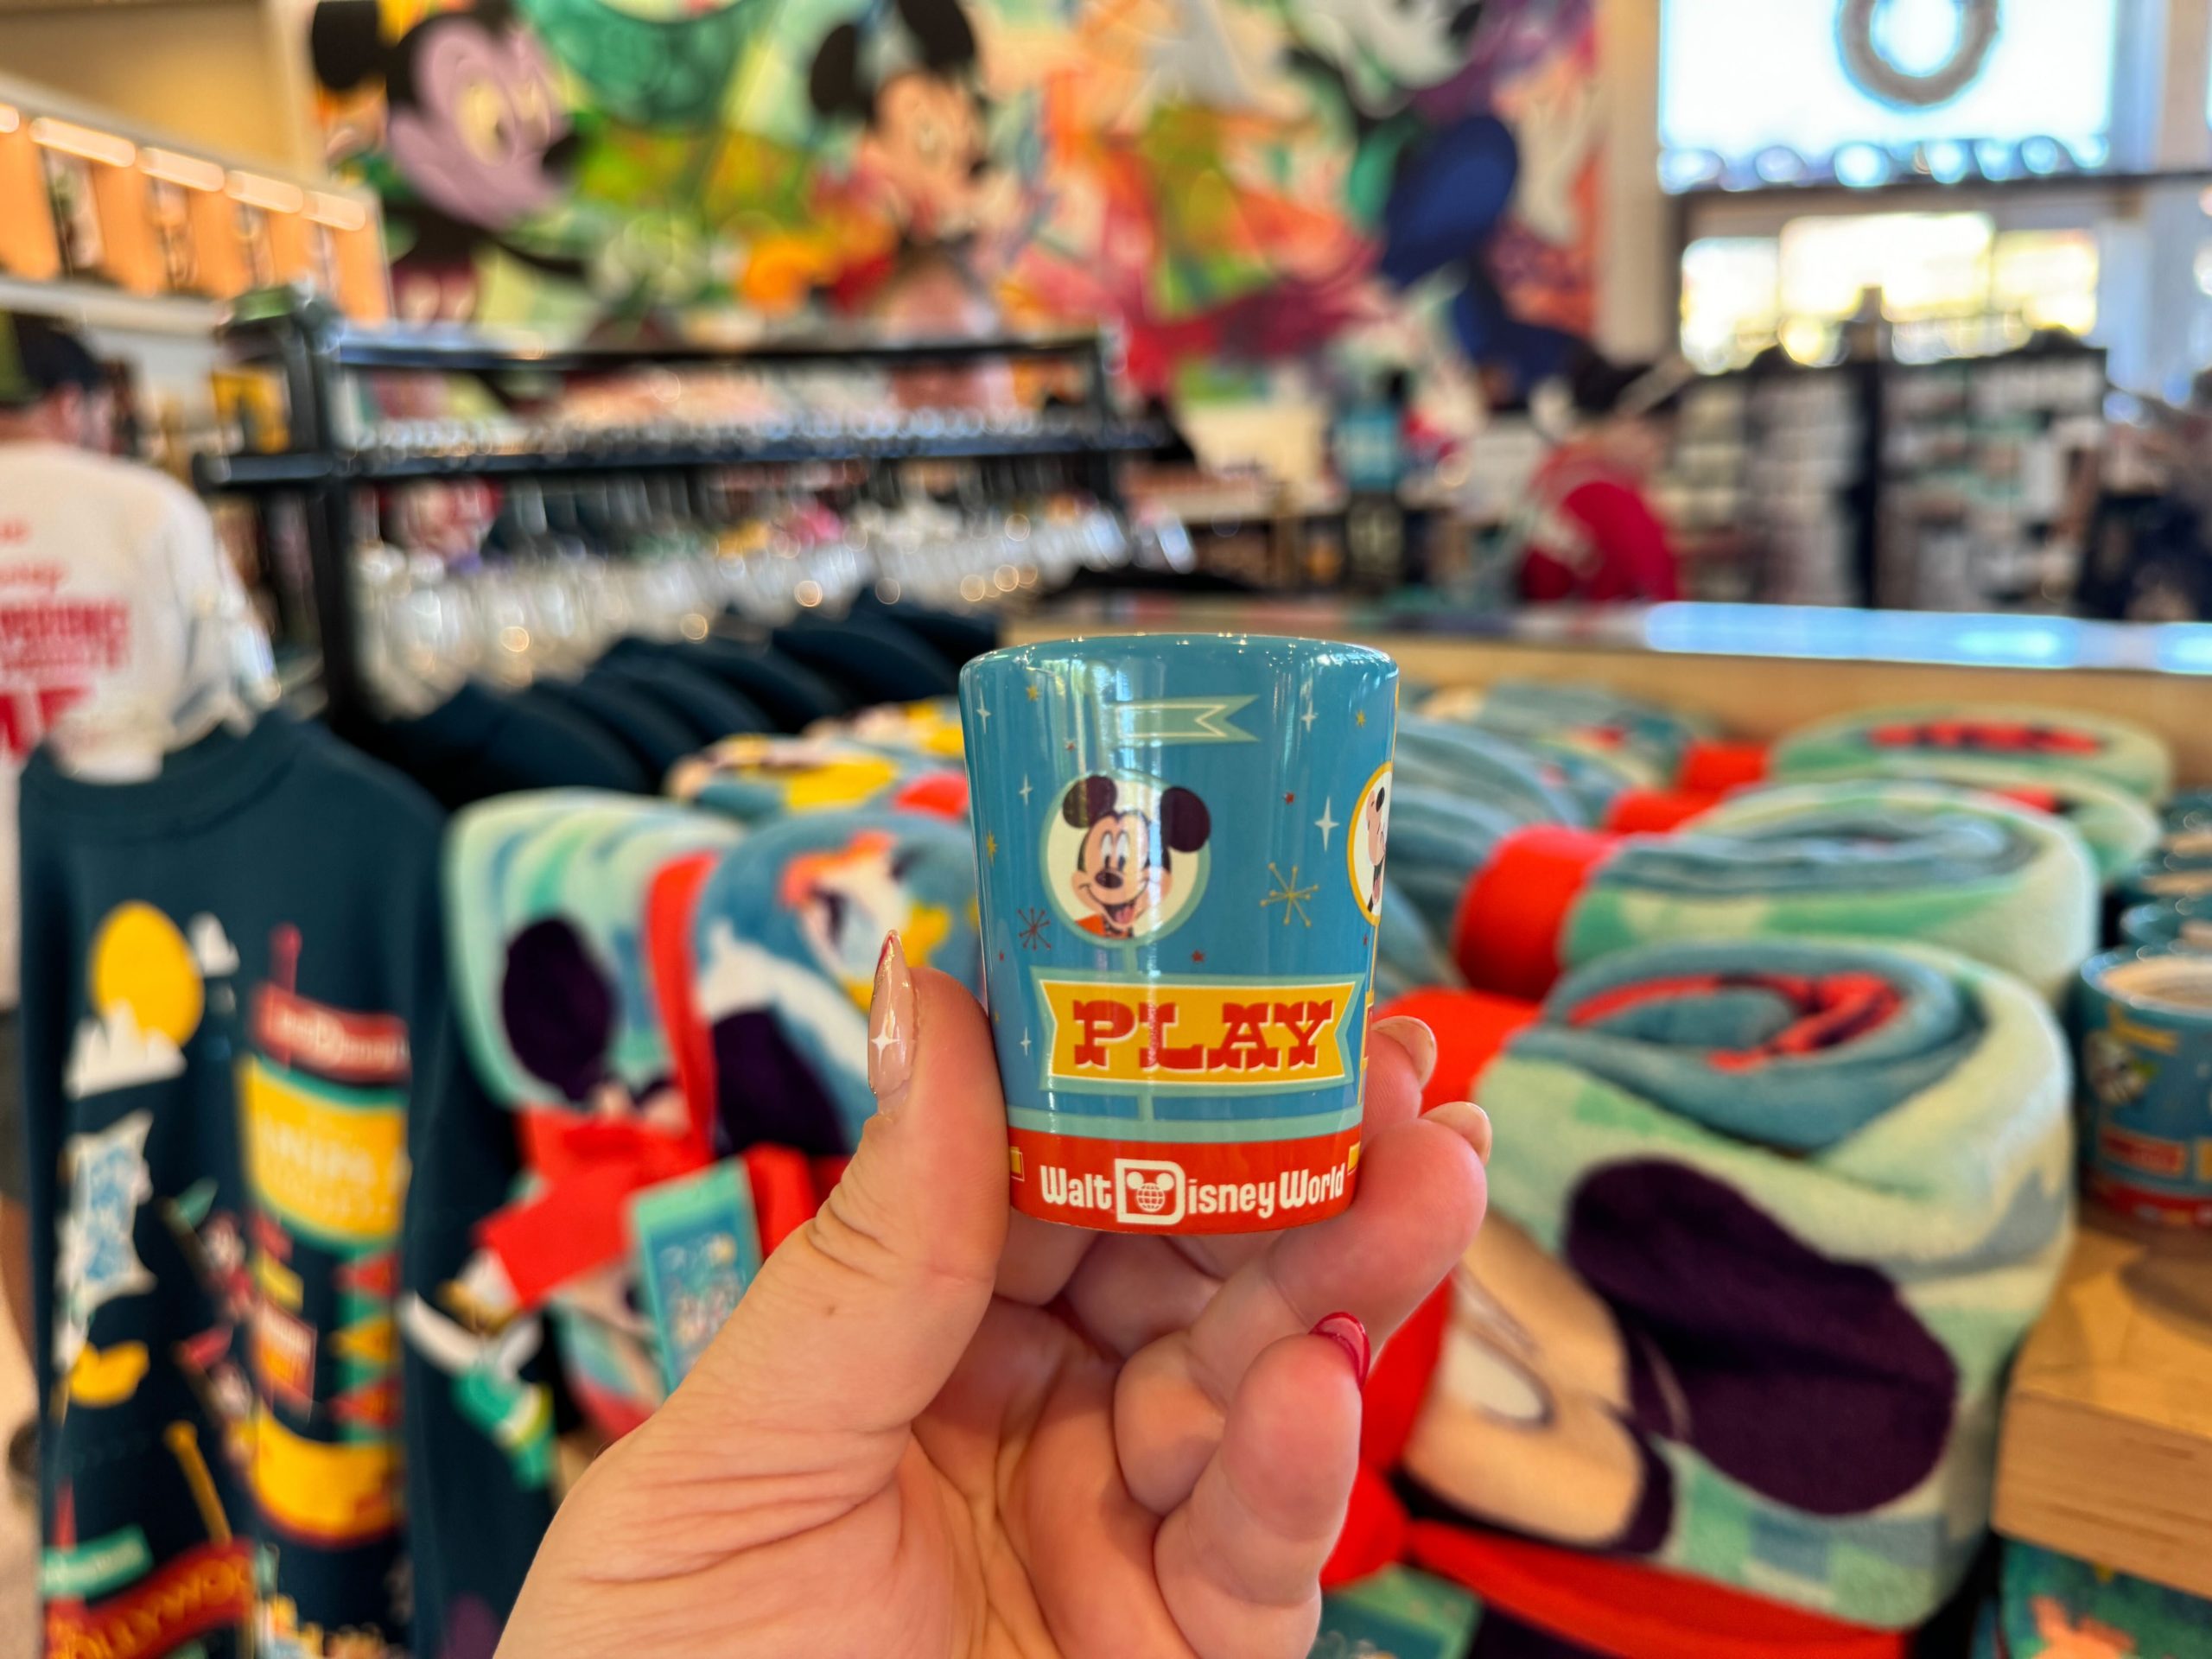 Play in the Parks merchandise